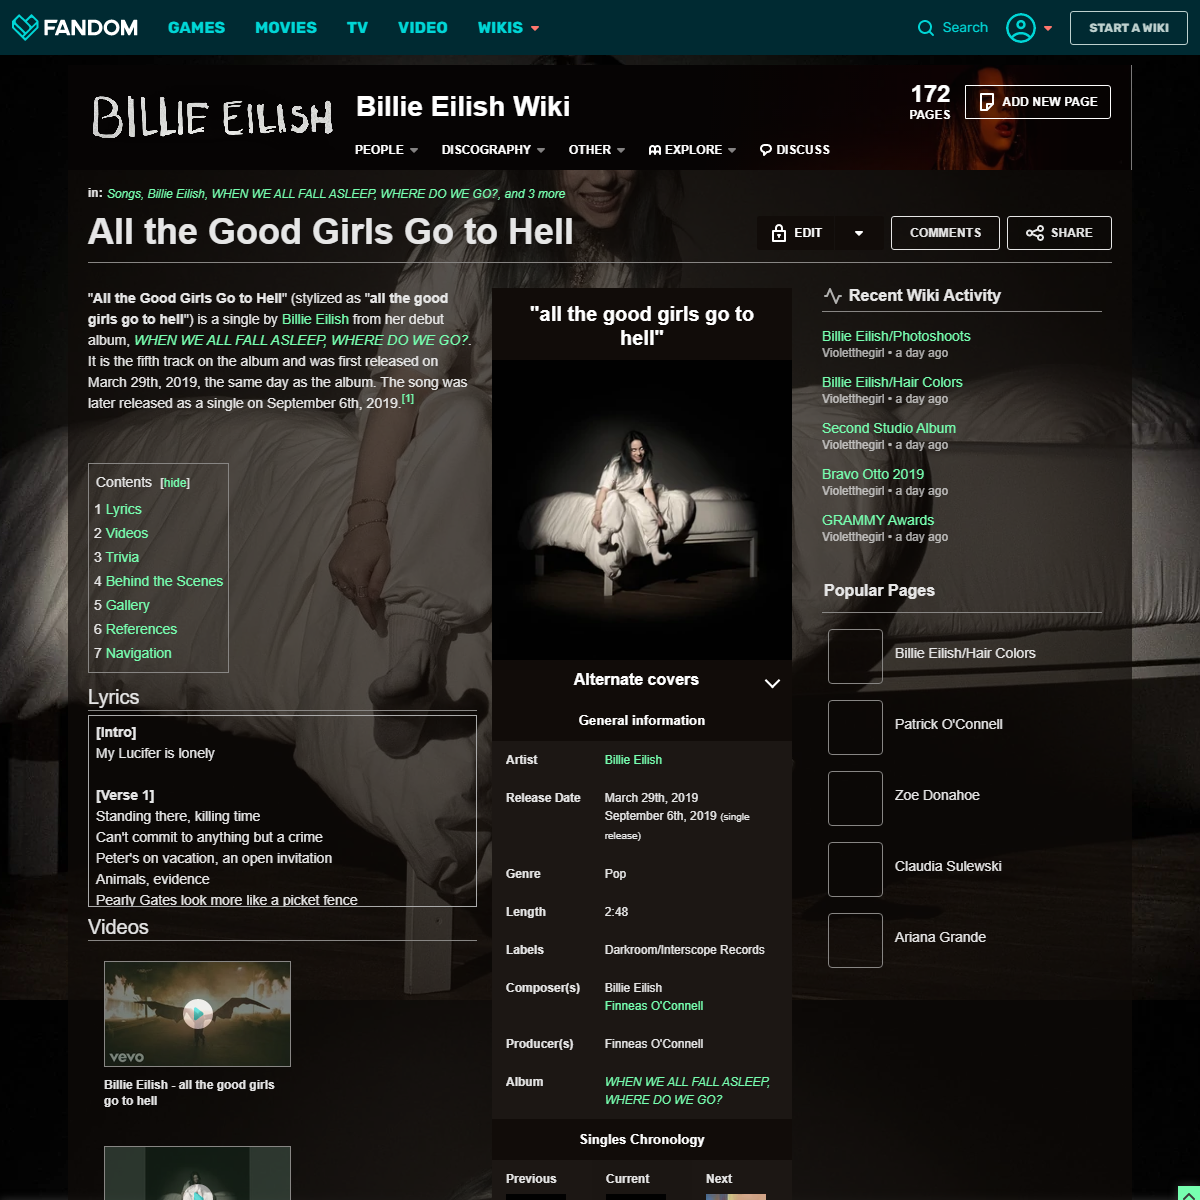 A complete backup of https://billieeilish.fandom.com/wiki/All_the_Good_Girls_Go_to_Hell